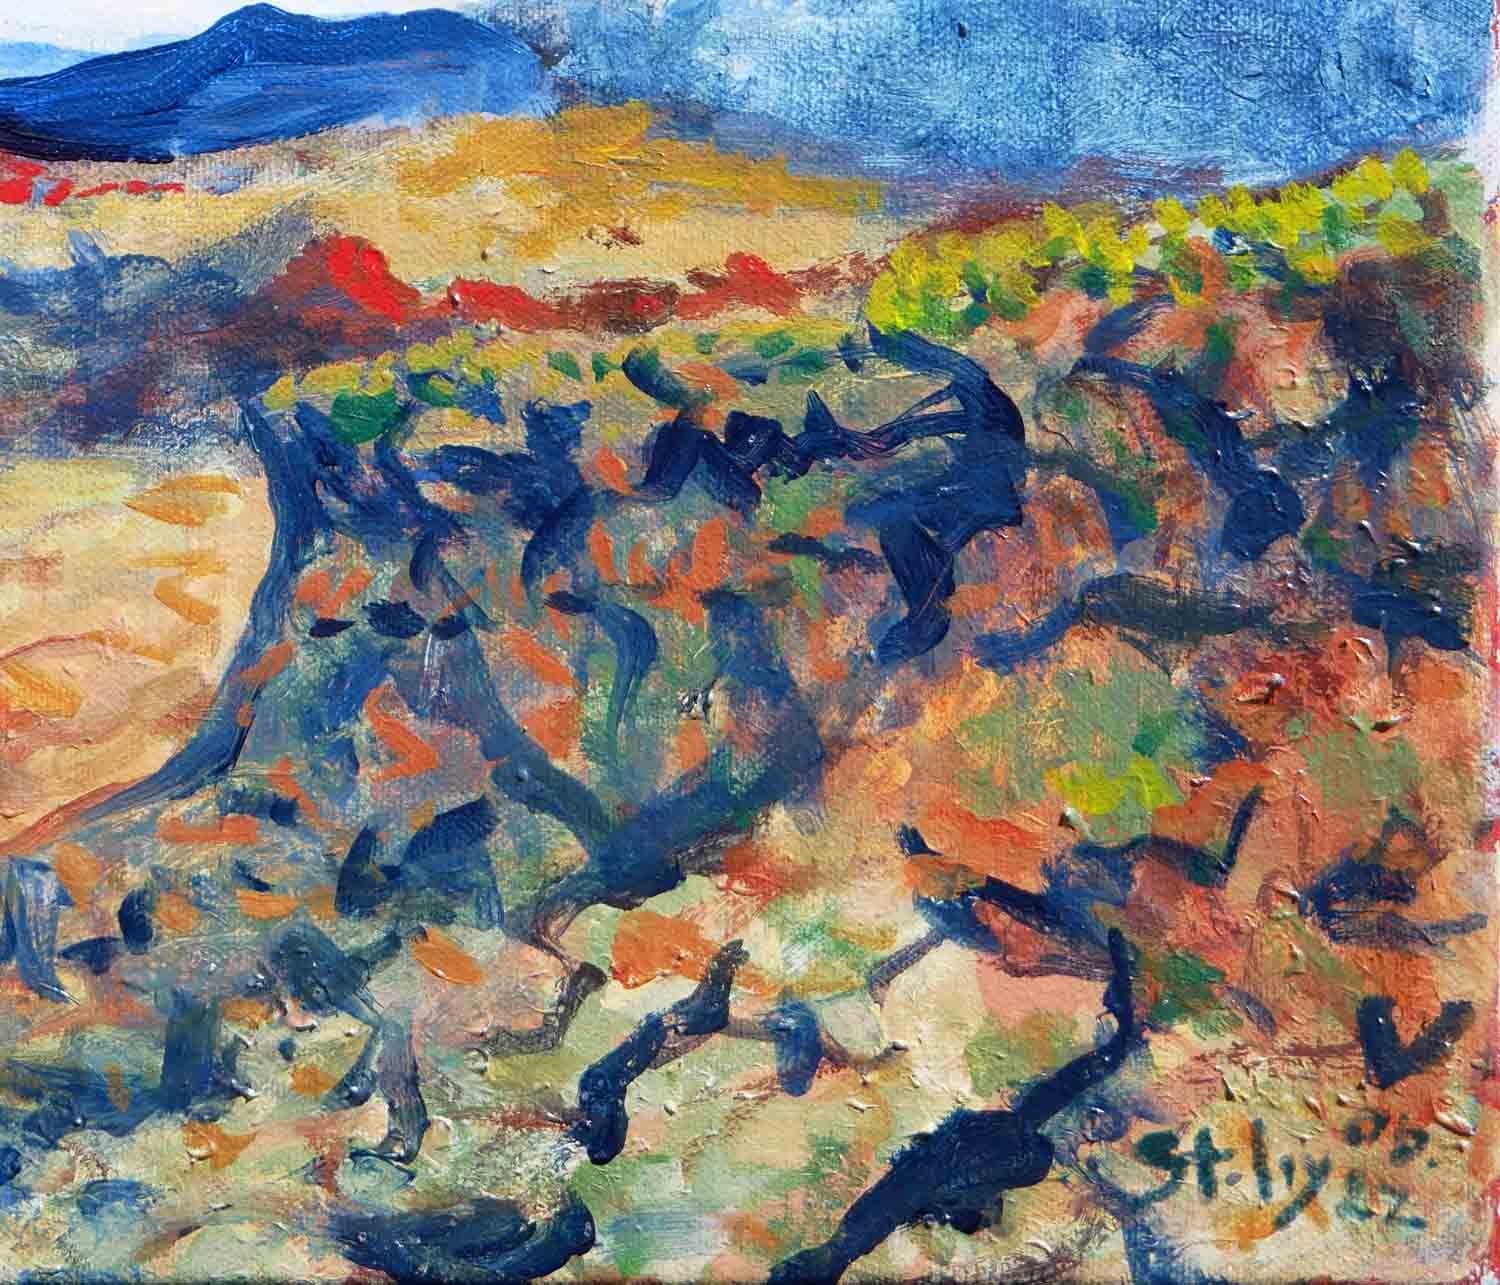 Blue and brown-toned abstract impressionist painting by Houston, TX artist Earl Staley. This painting features mountains in Big Bend National Park in Texas. Signed by the artist in the lower right corner. Unframed but framing options are